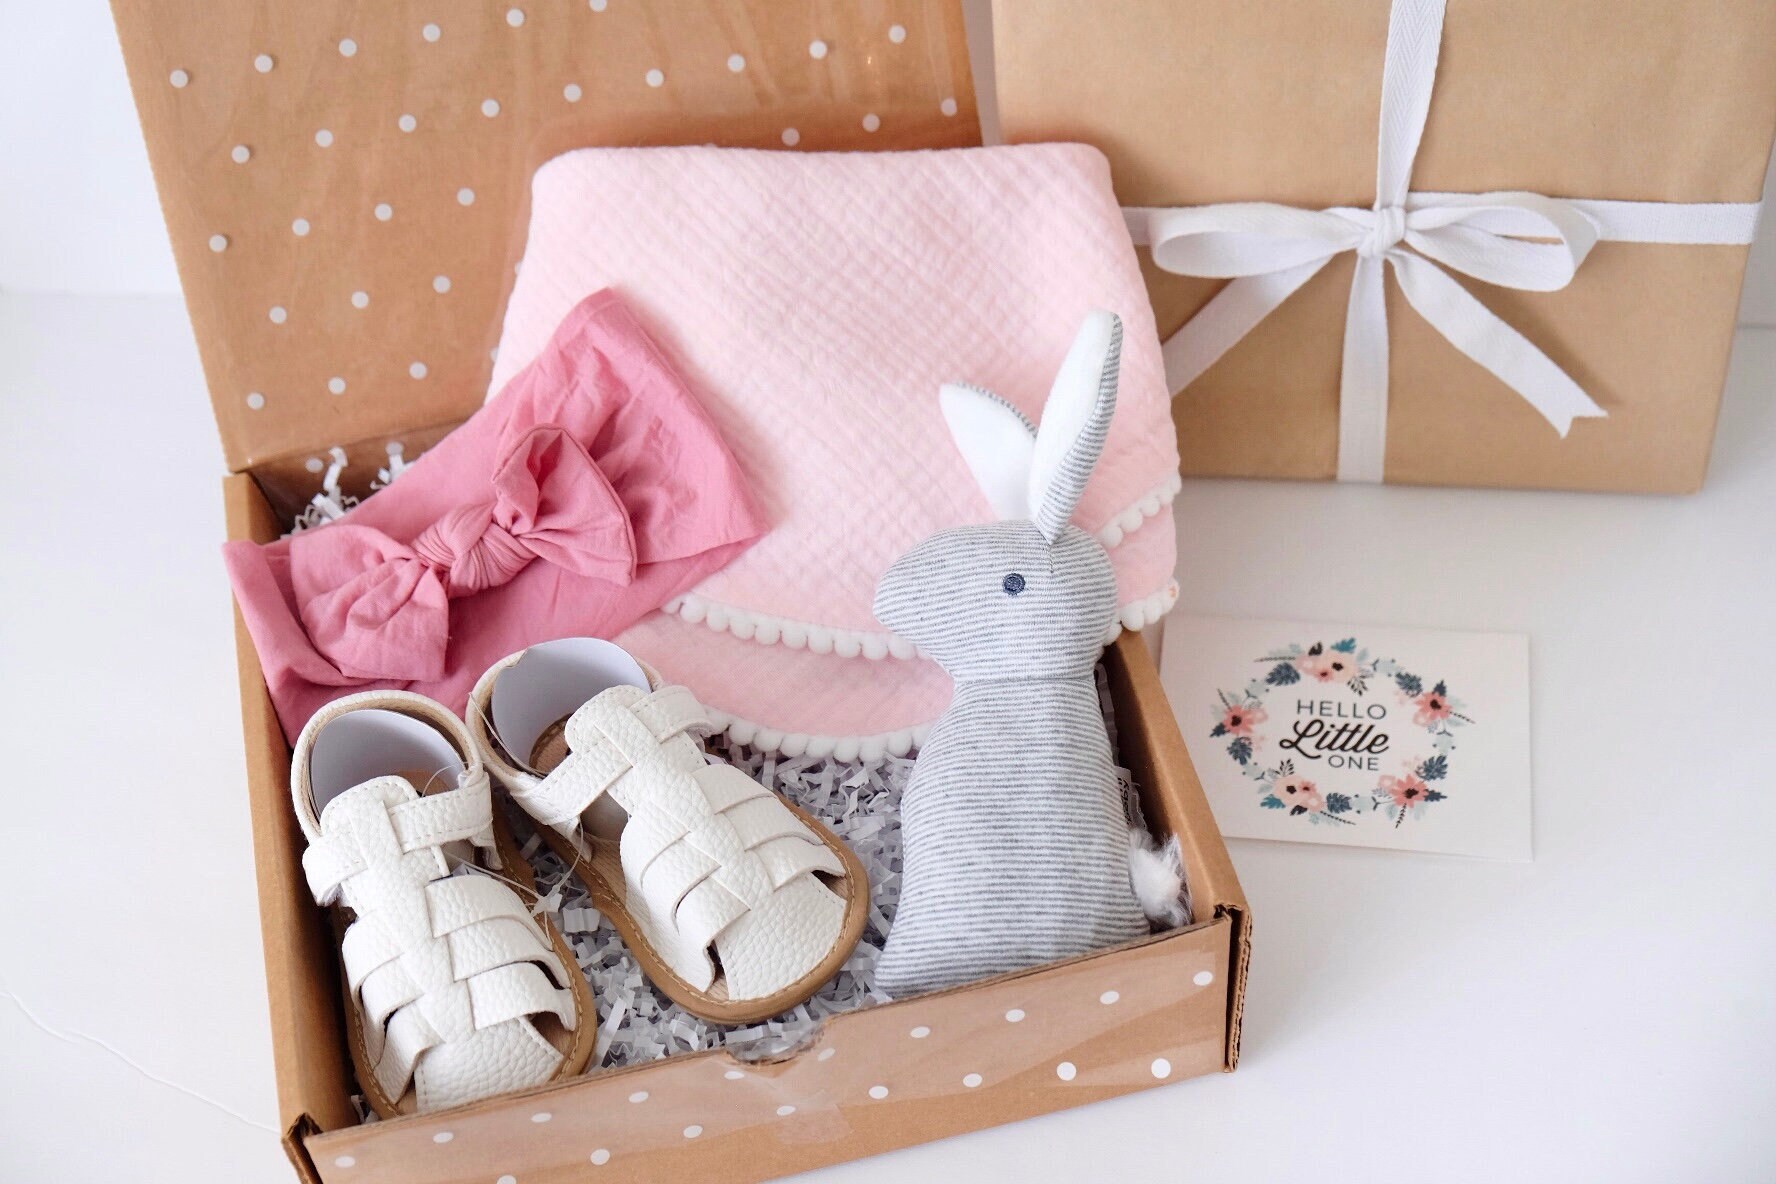 Buy Summer Baby Gift Box Ready To Ship Baby Shower Gift, 56% OFF